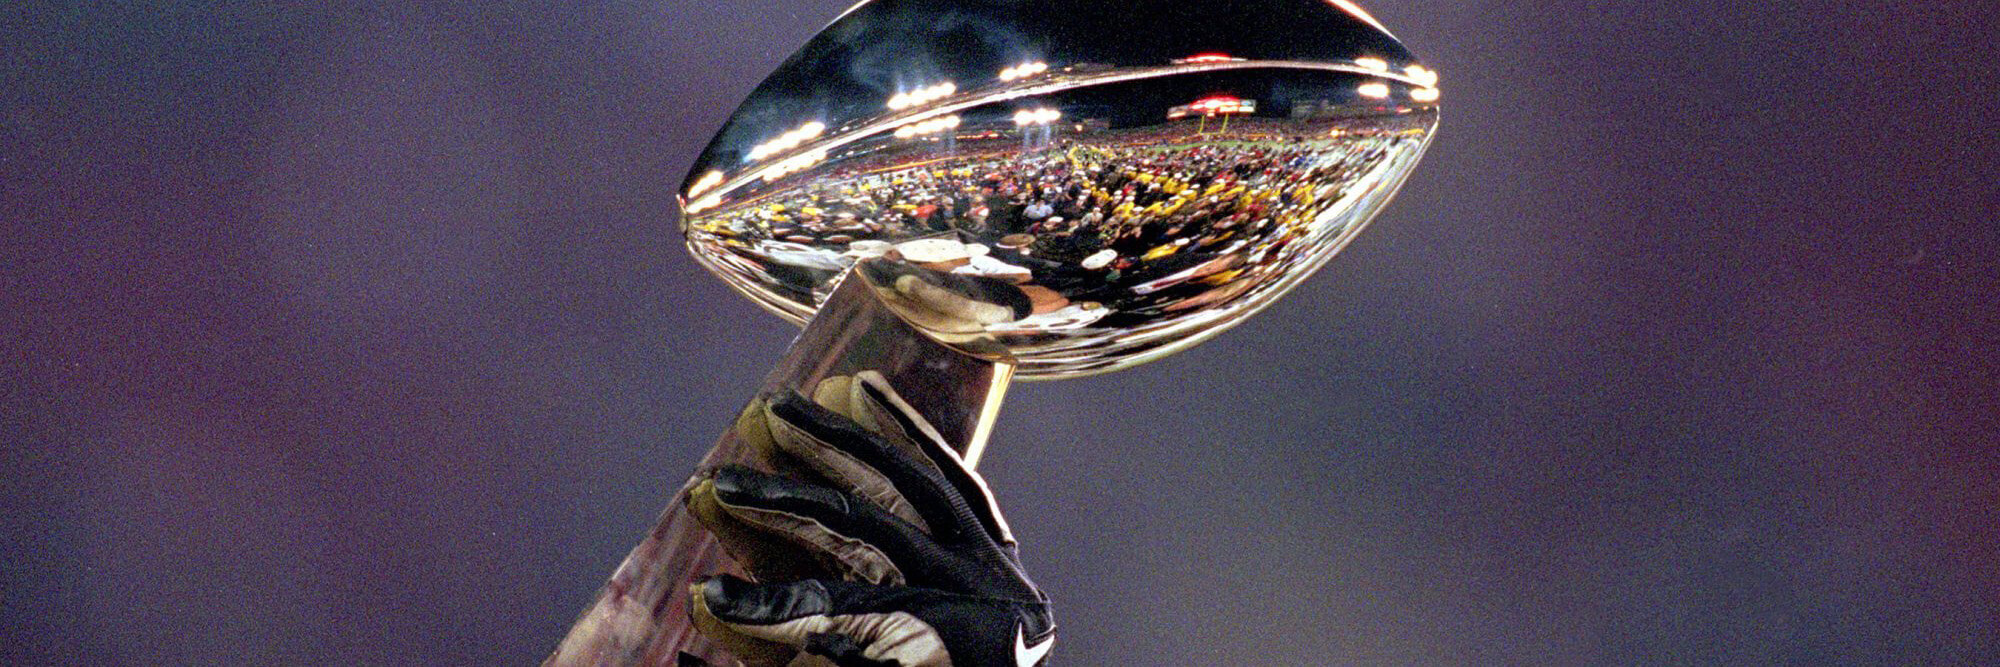 The Long Game – My Top 4 Super Bowl Picks & Odds To Win It All!